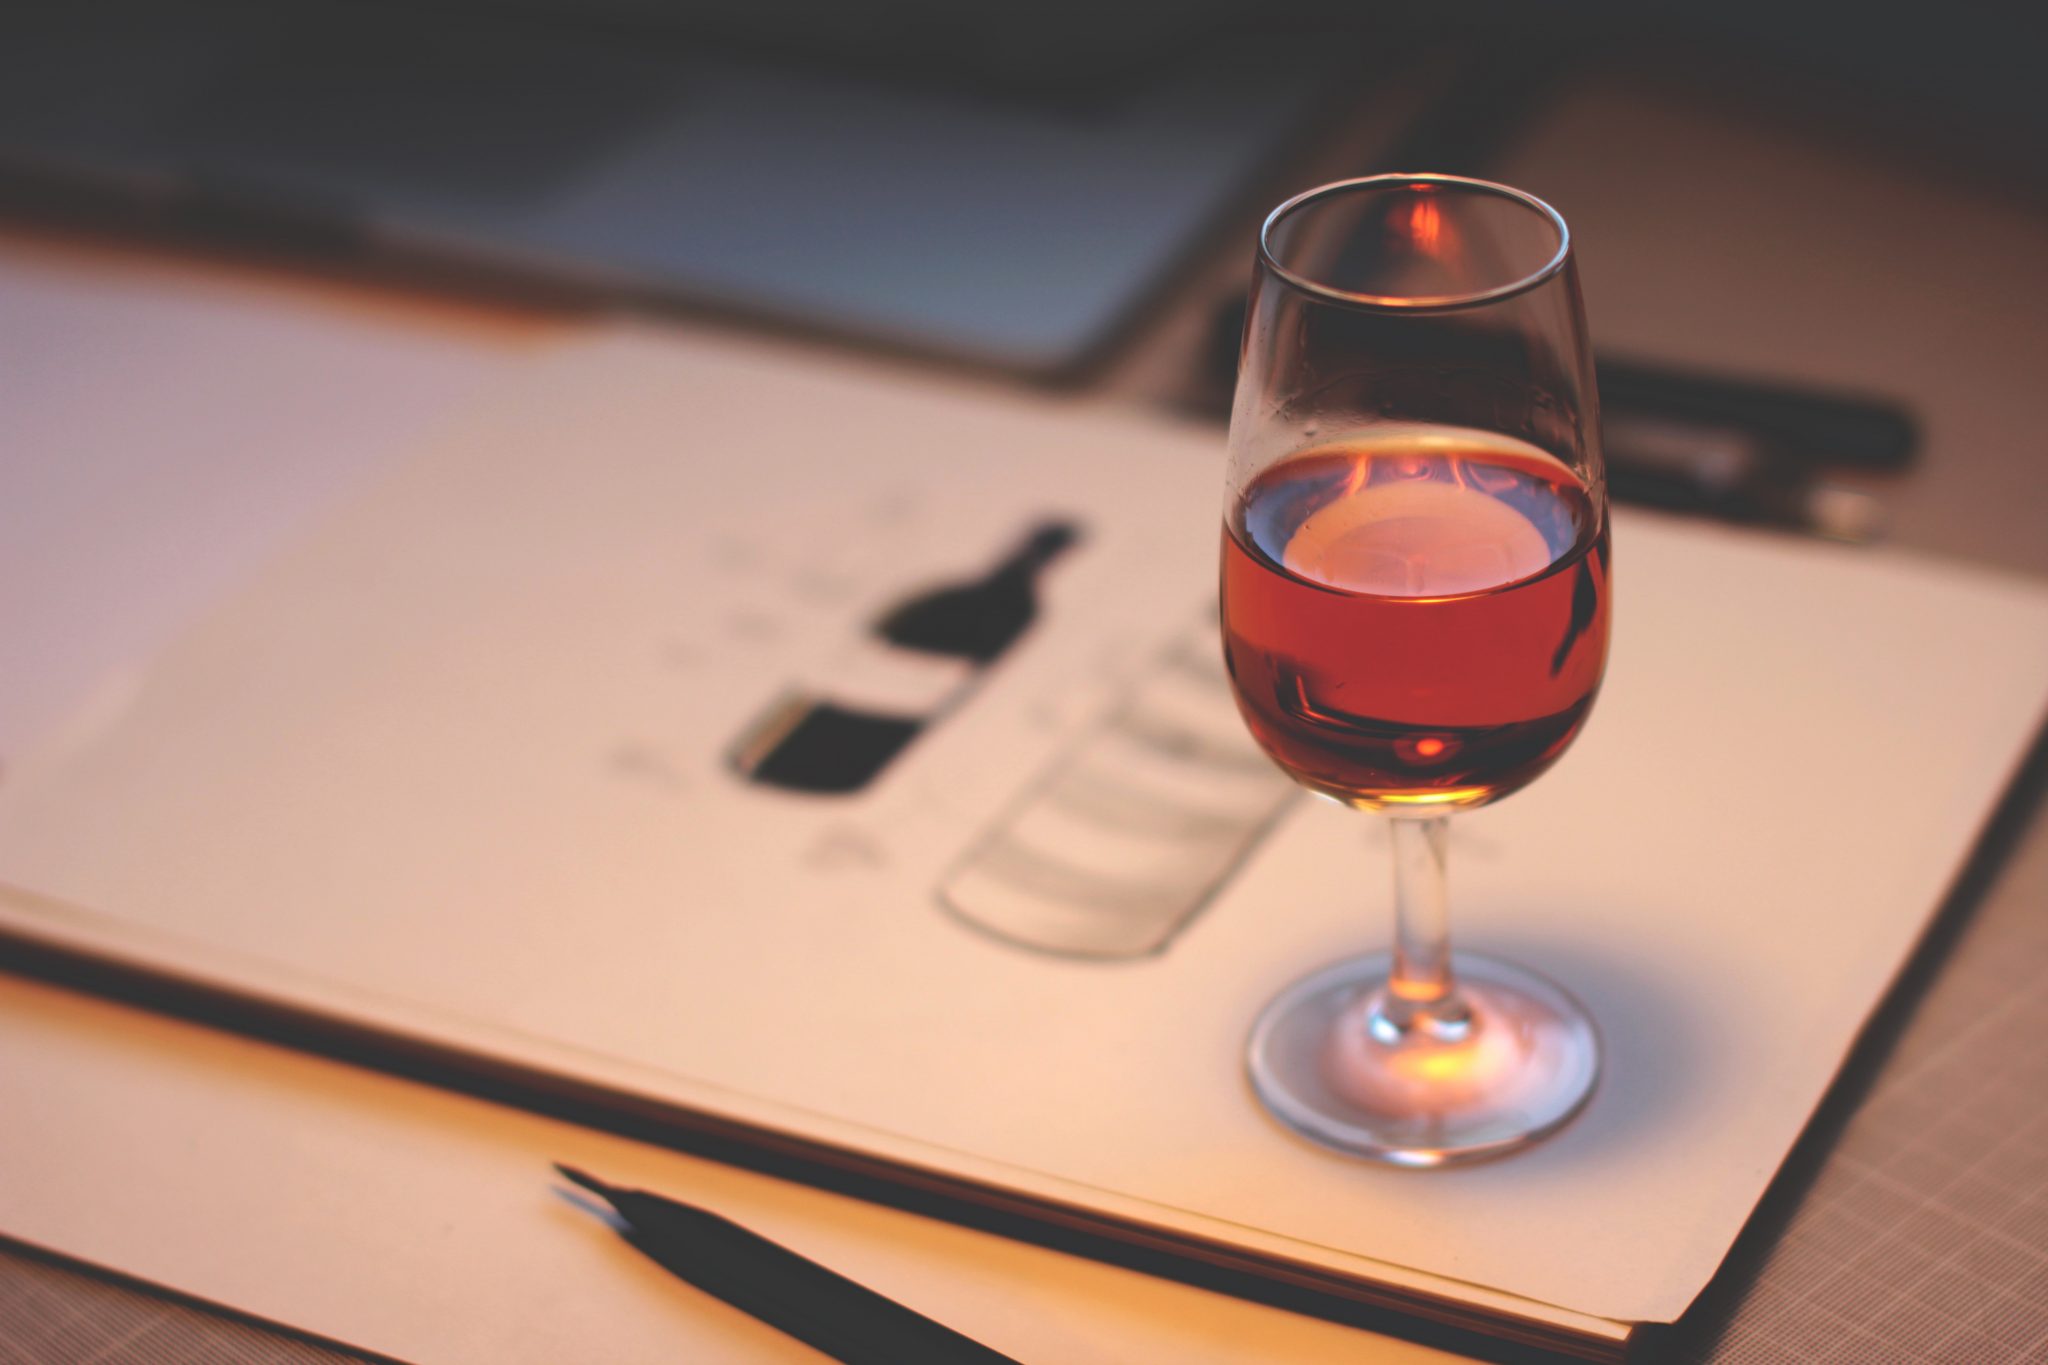 Wine glass on desk with pen and paper describing wines